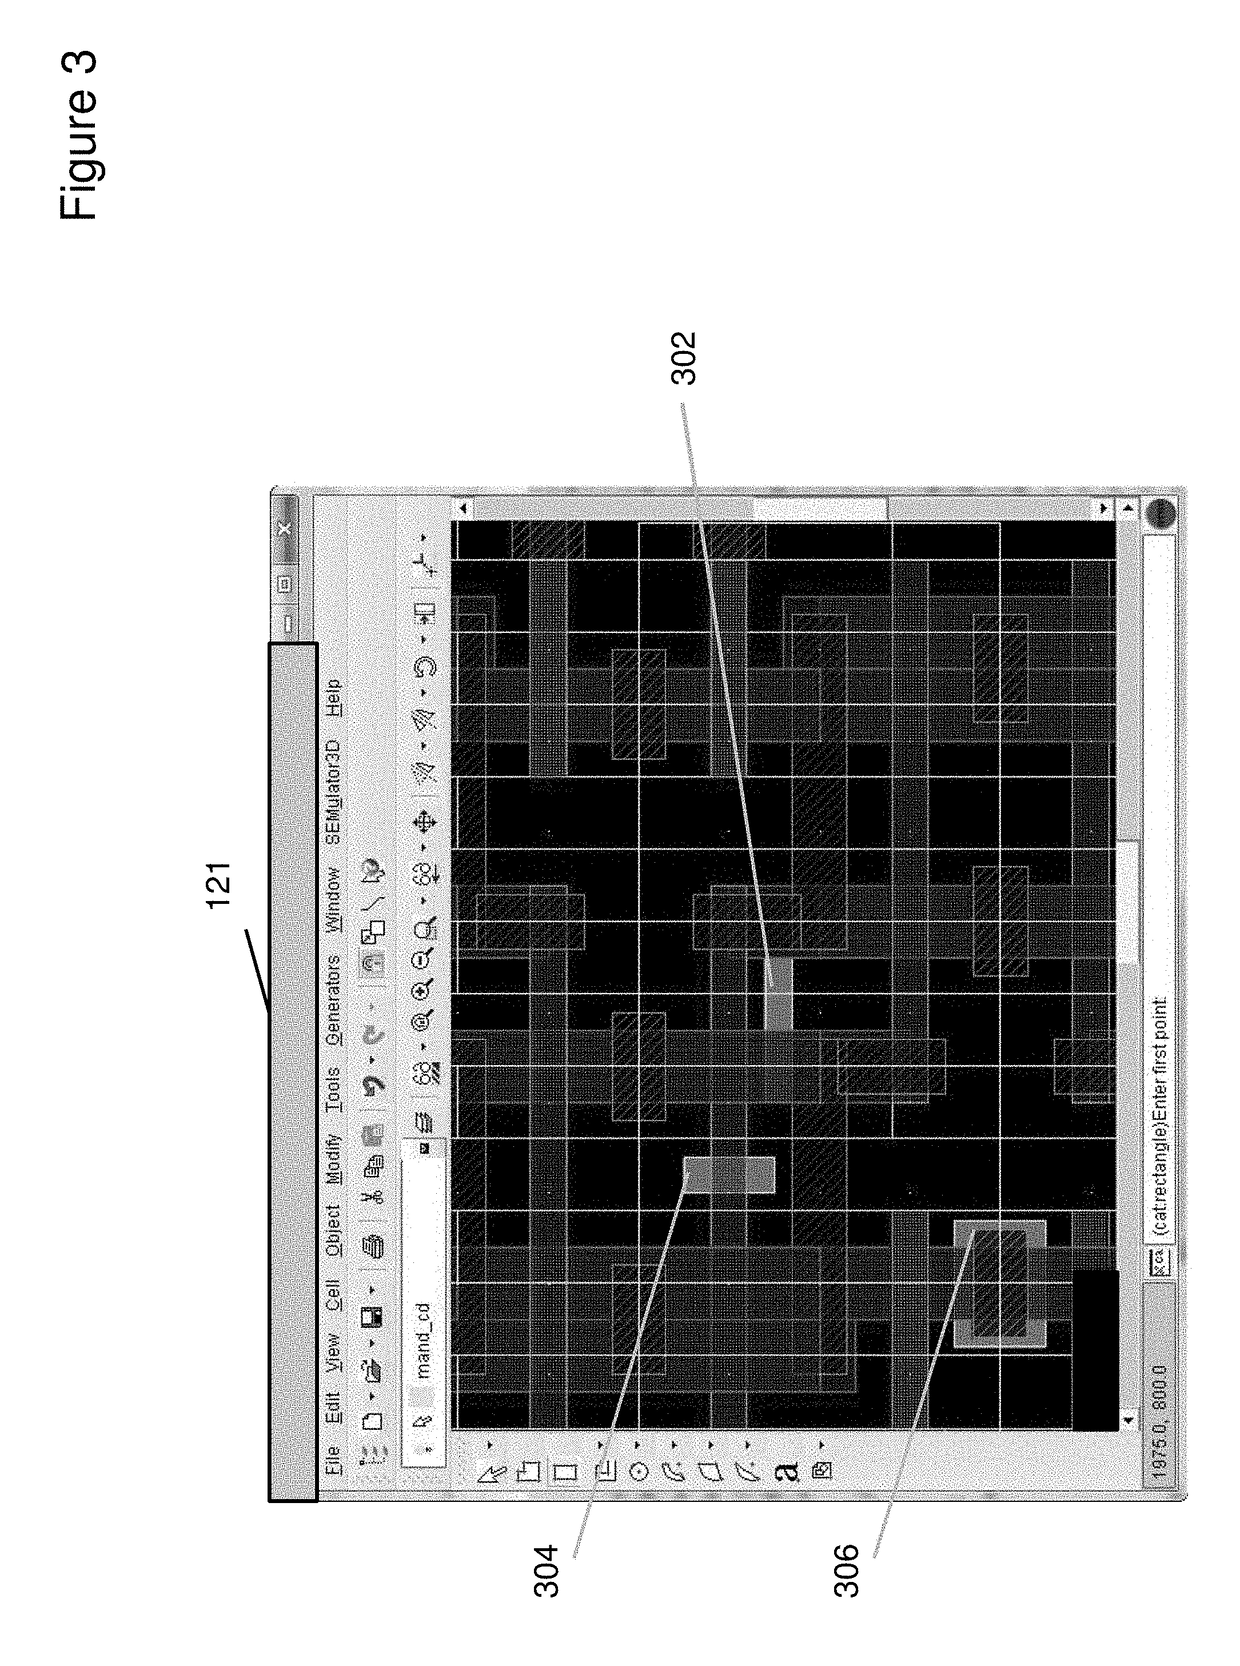 System and method for key parameter identification, process model calibration and variability analysis in a virtual semiconductor device fabrication environment